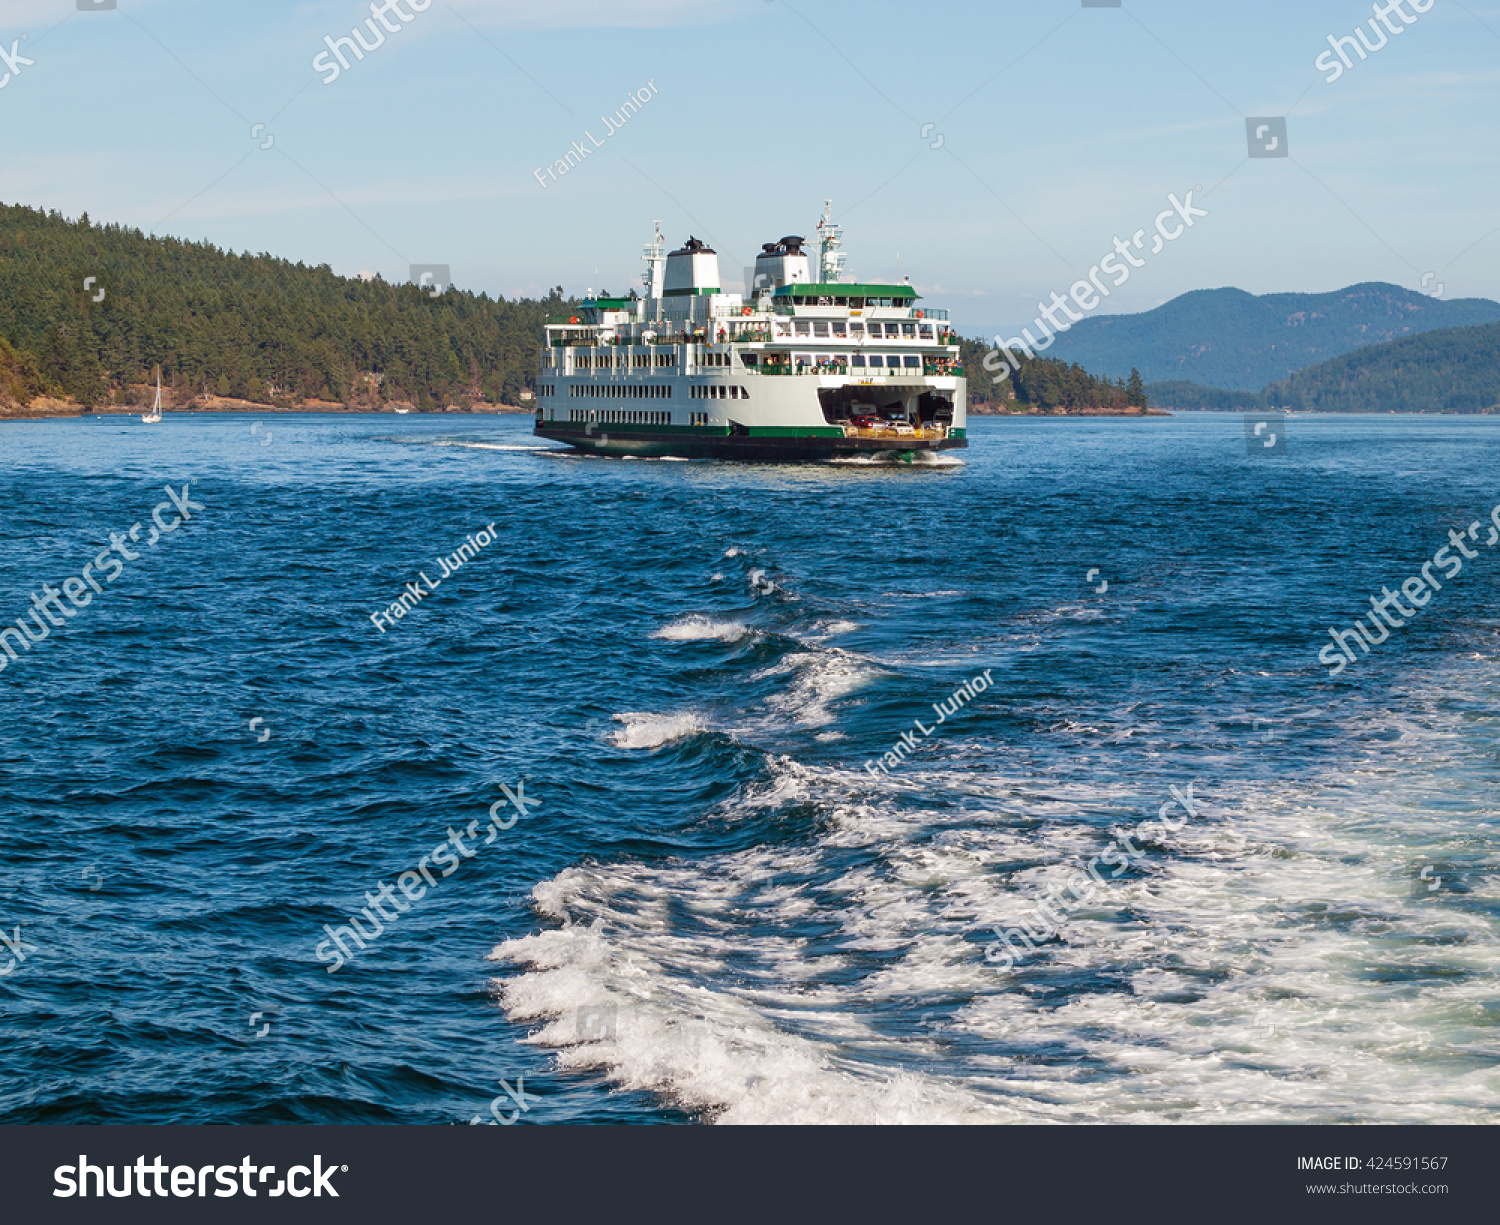 Ferry Boat in the Puget Sound in Washington State USA #424591567